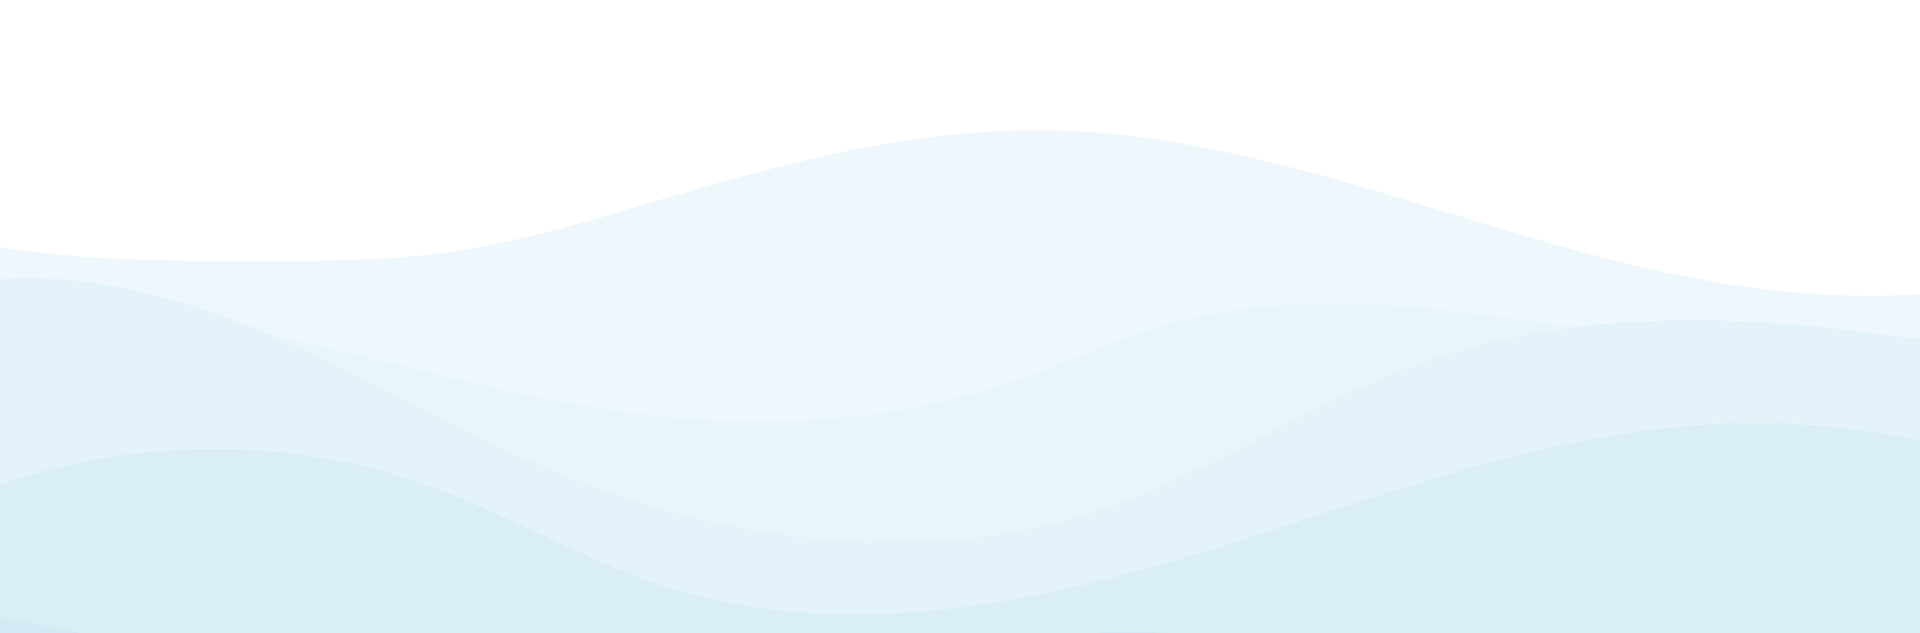 Light blue wave with transparent background for the location section